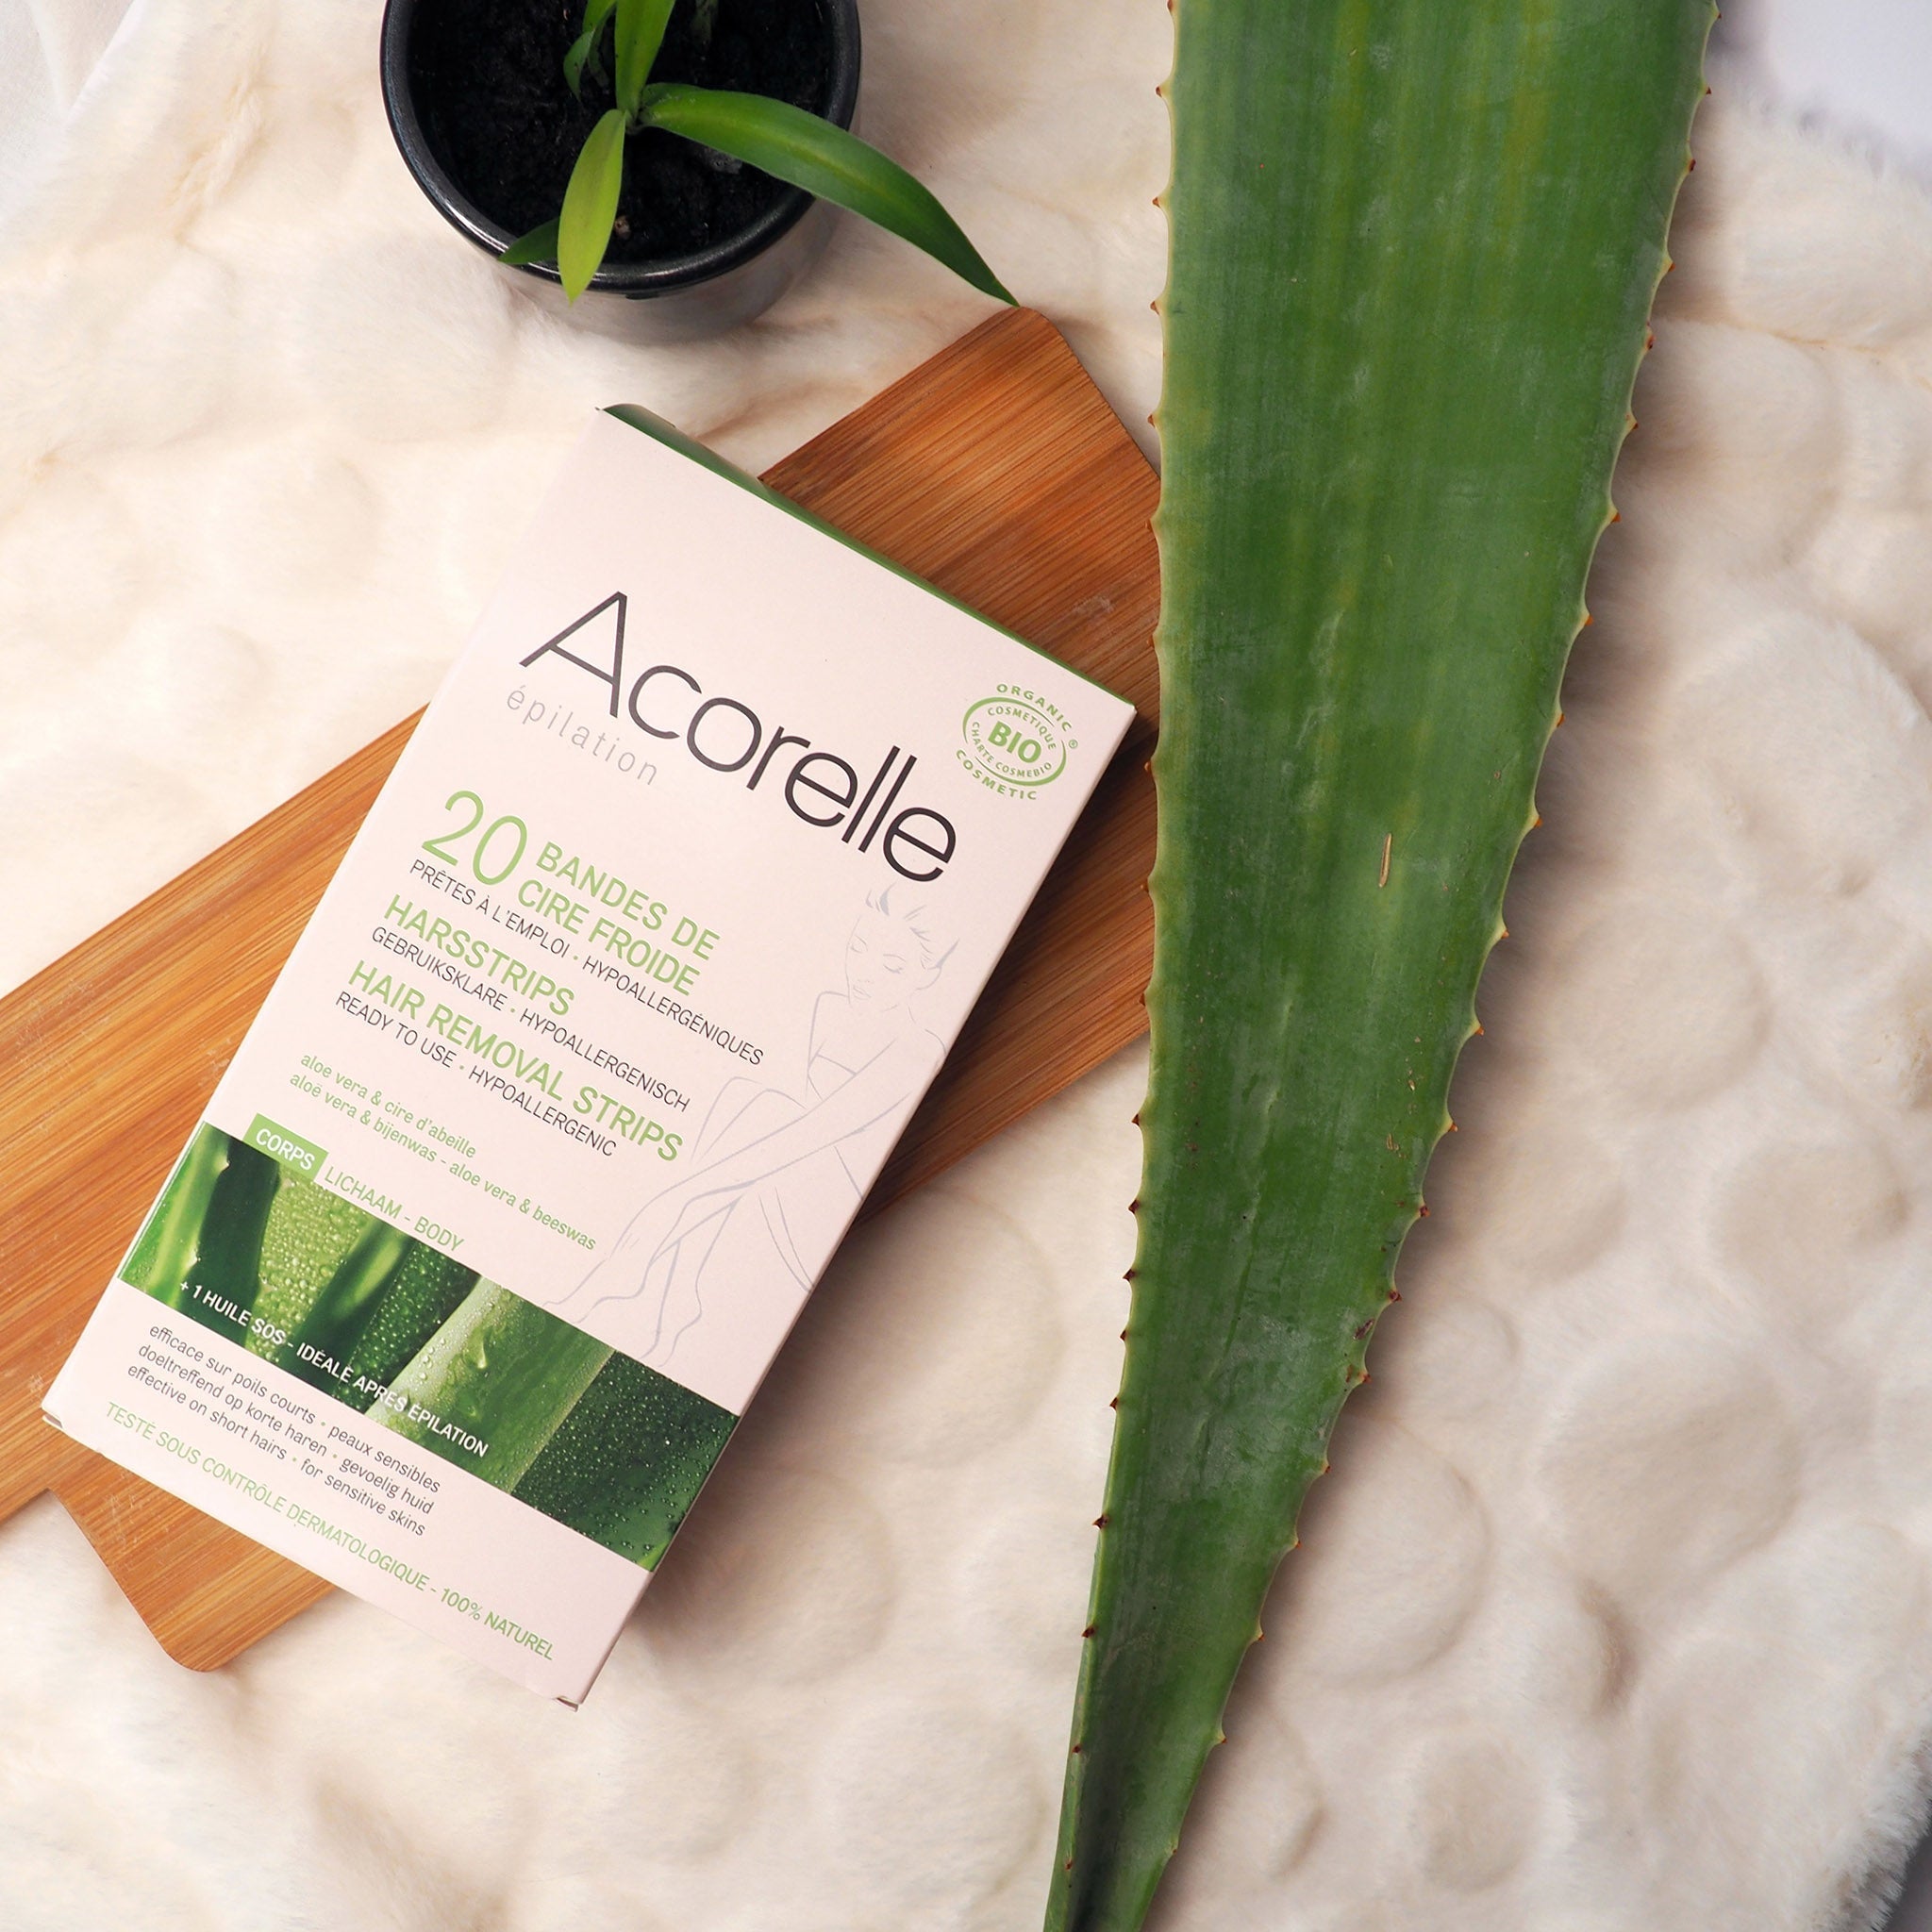 Acorelle Ready to use Body Hair Removal Strips - Free with £60 Spend - mypure.co.uk